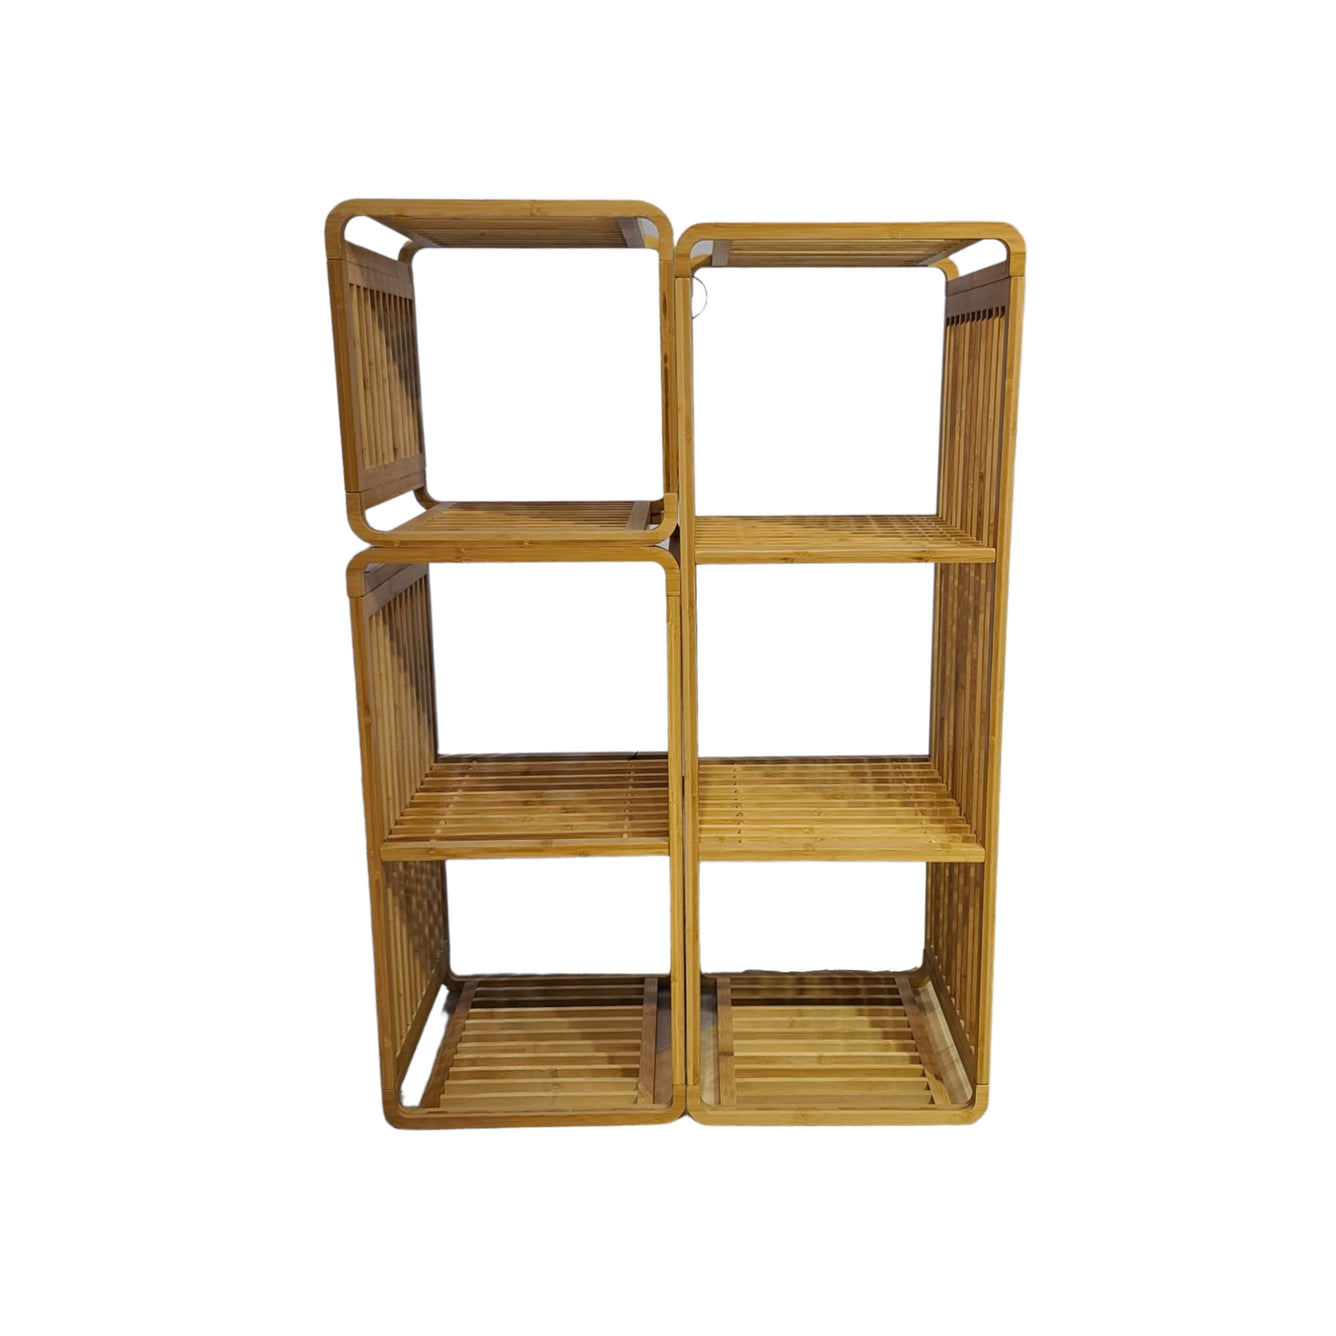 Bamboo square rack